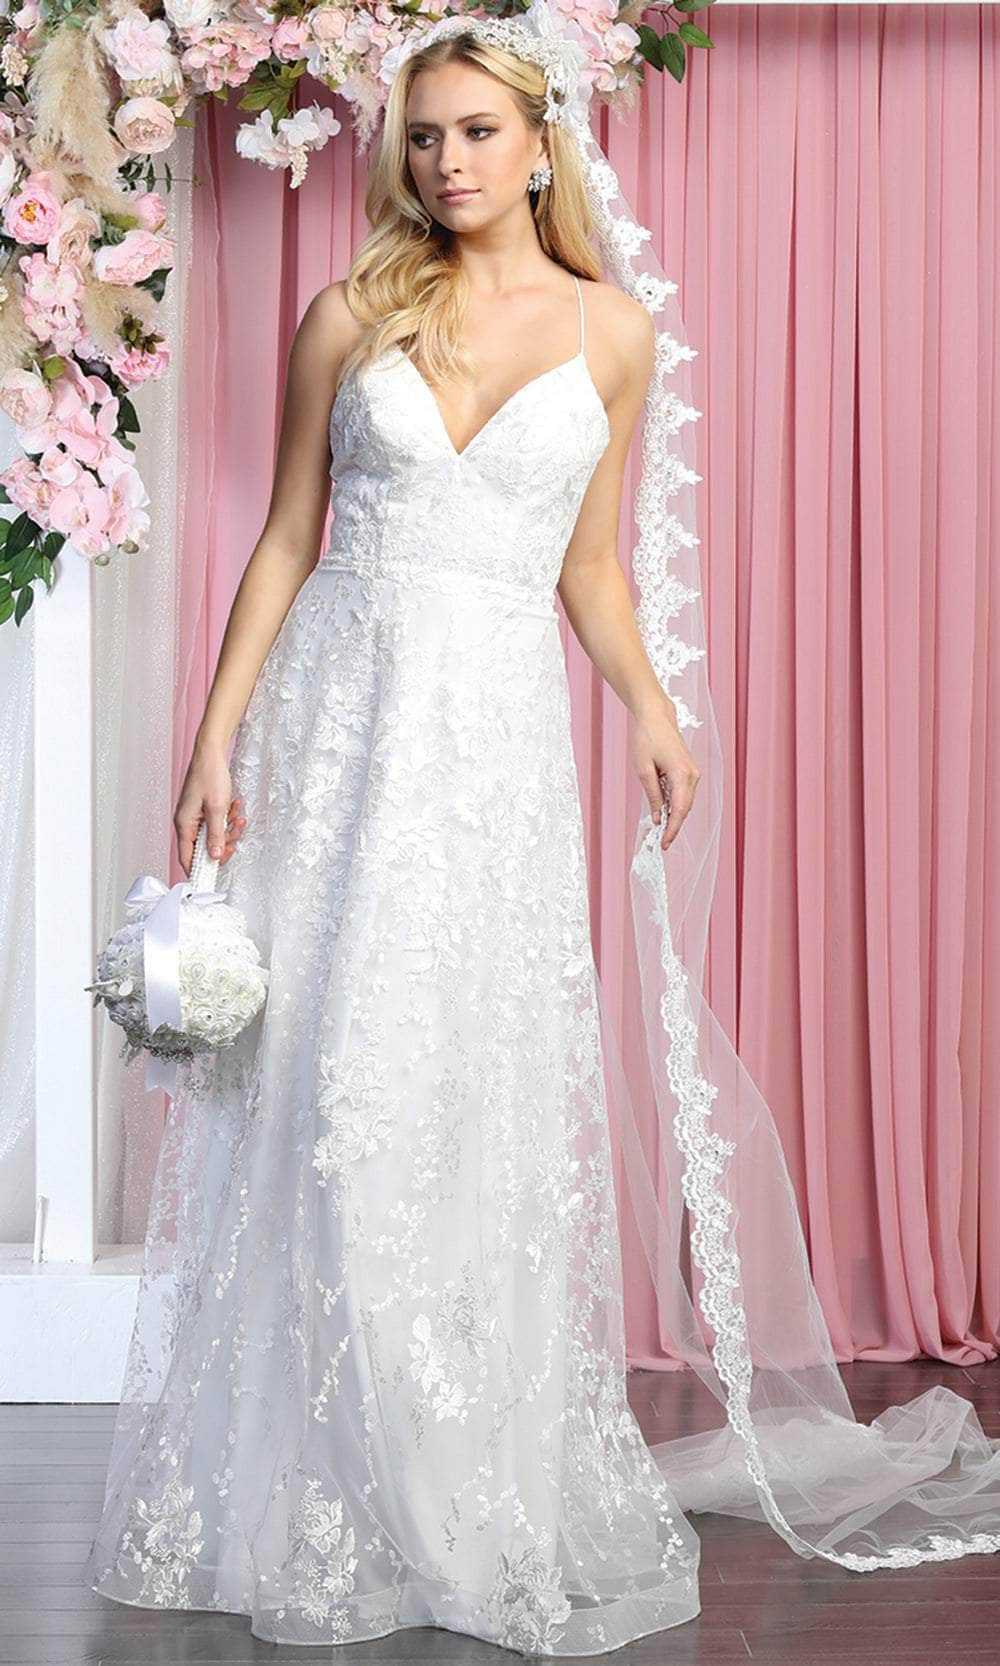 May Queen, May Queen MQ1885 - V Neck Lace-Up Back Bridal Gown